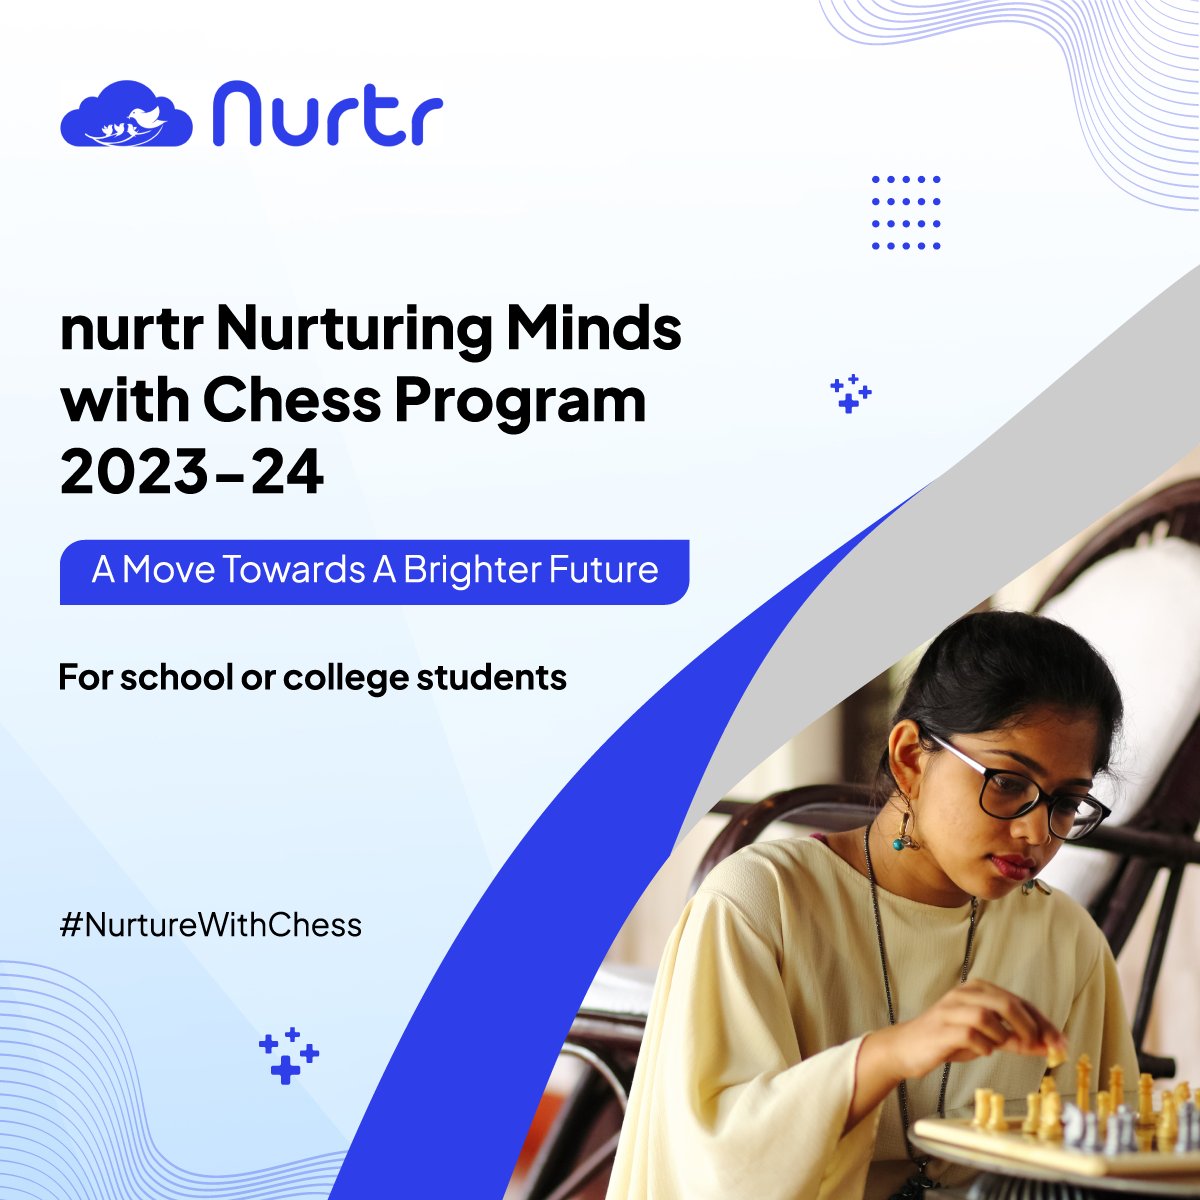 Apply for 'nurtr Nurturing Minds with Chess 2023-24' and get subsidised chess learning with a scholarship of up to 90% for eligible students. Register today! buddy4study.com/nurtneo?cuid=t… #Scholarships #NurtureWithChess